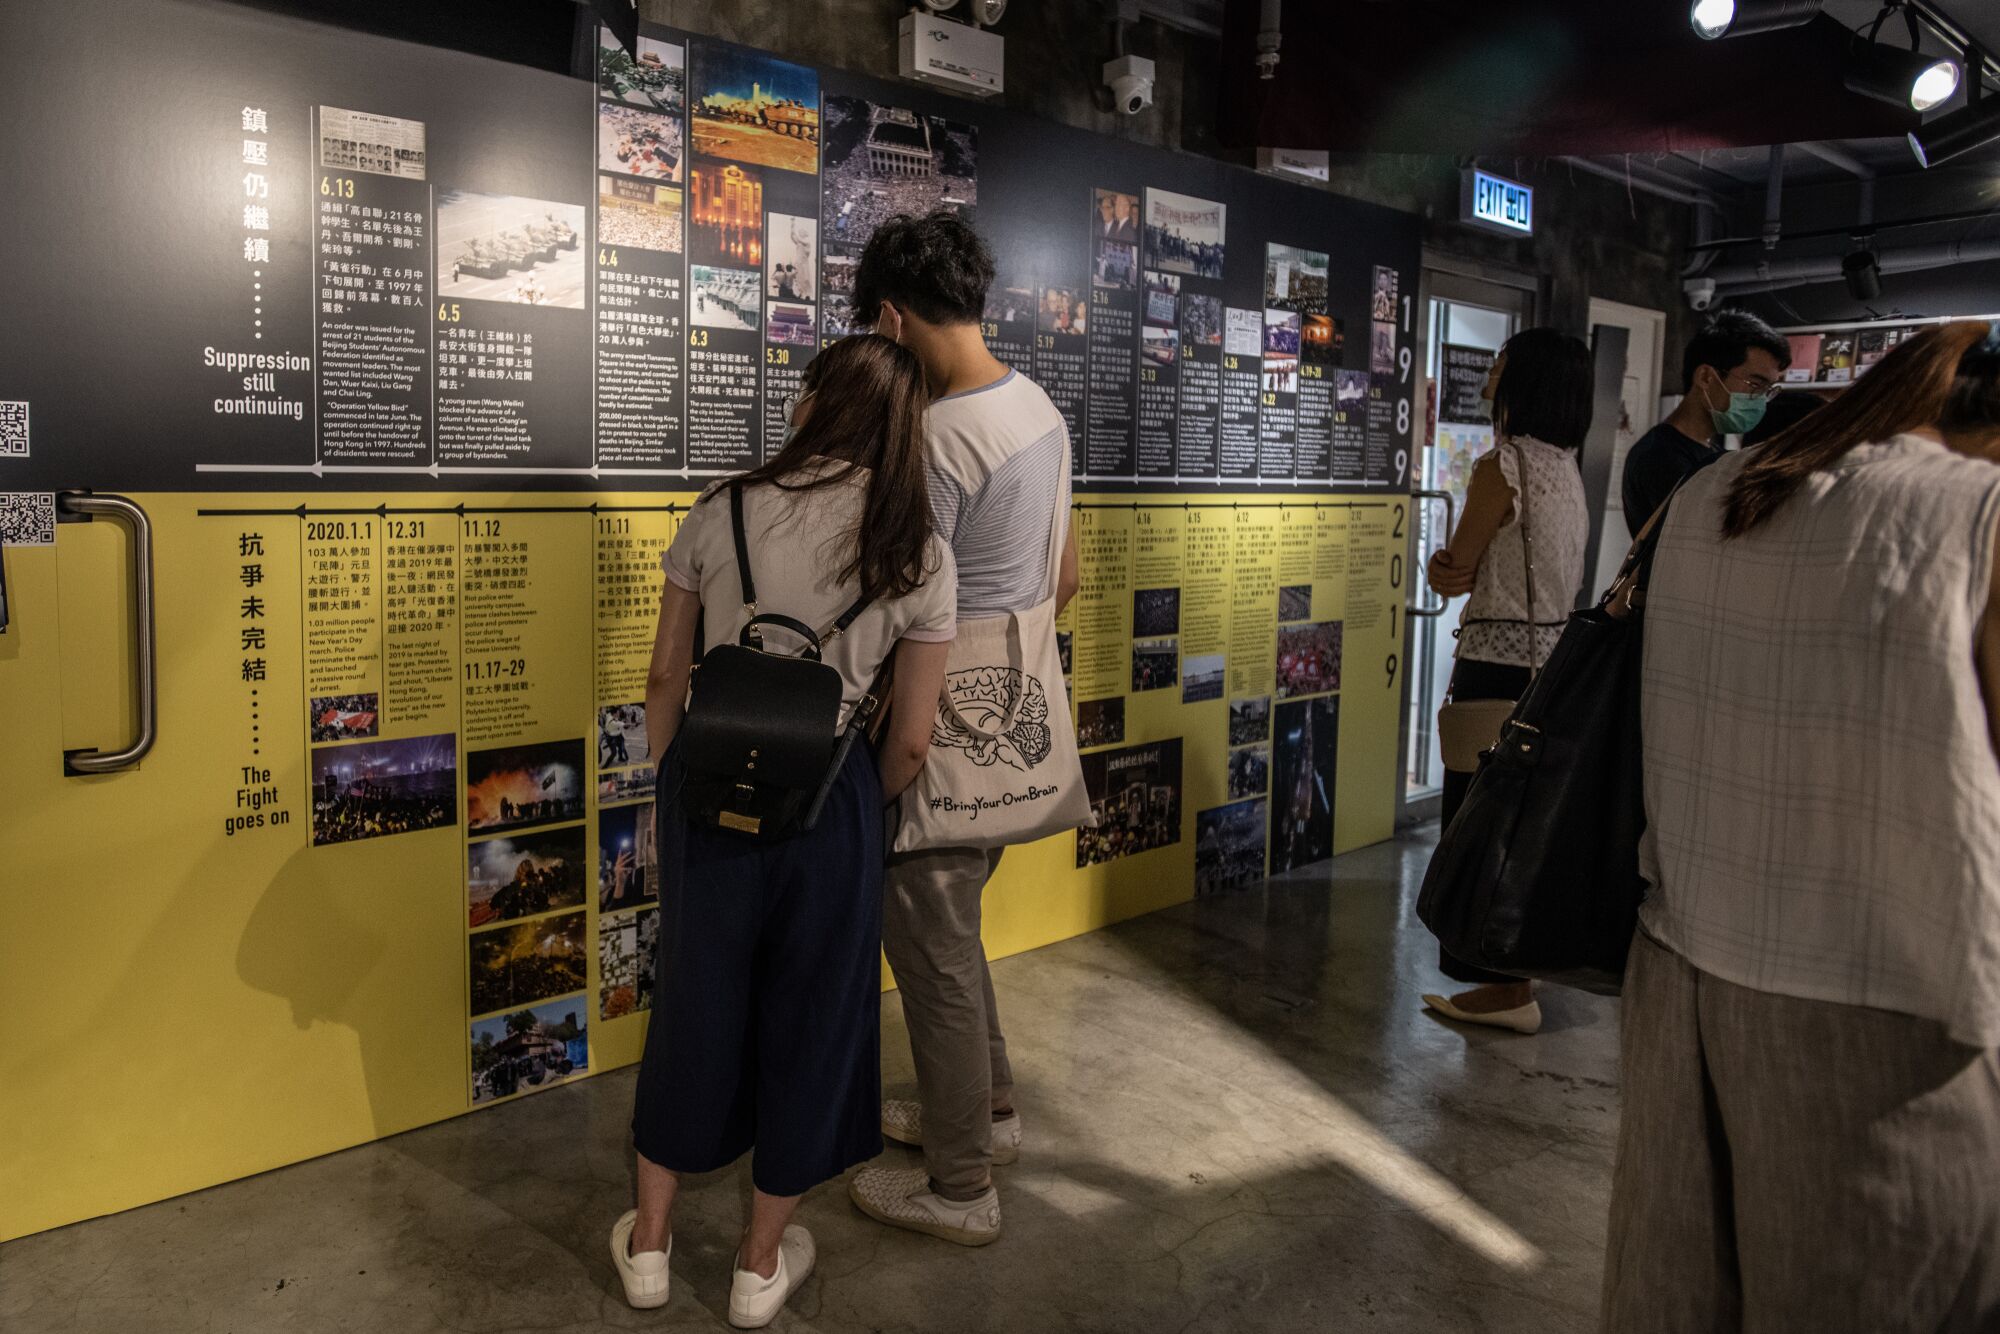 A couple looks at a display at the June 4 museum in Mong Kok, Hong Kong.